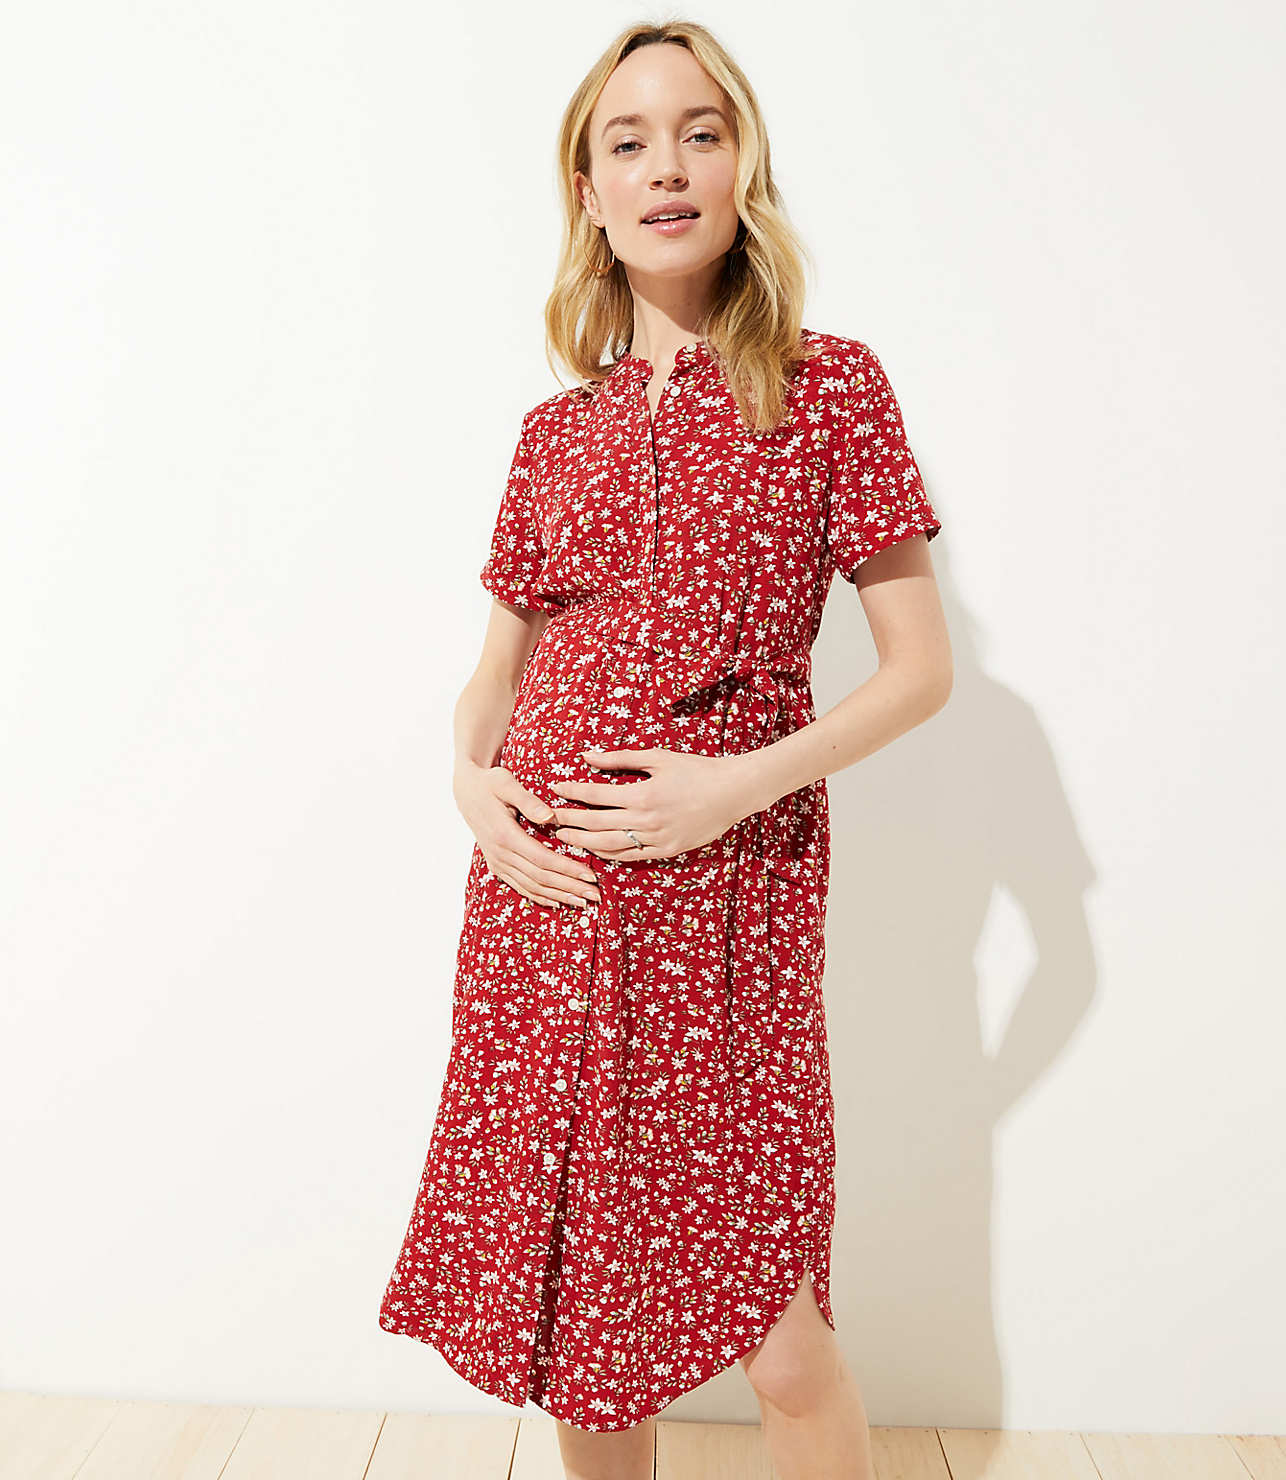 Petite Maternity Clothes: How to Shop Smart